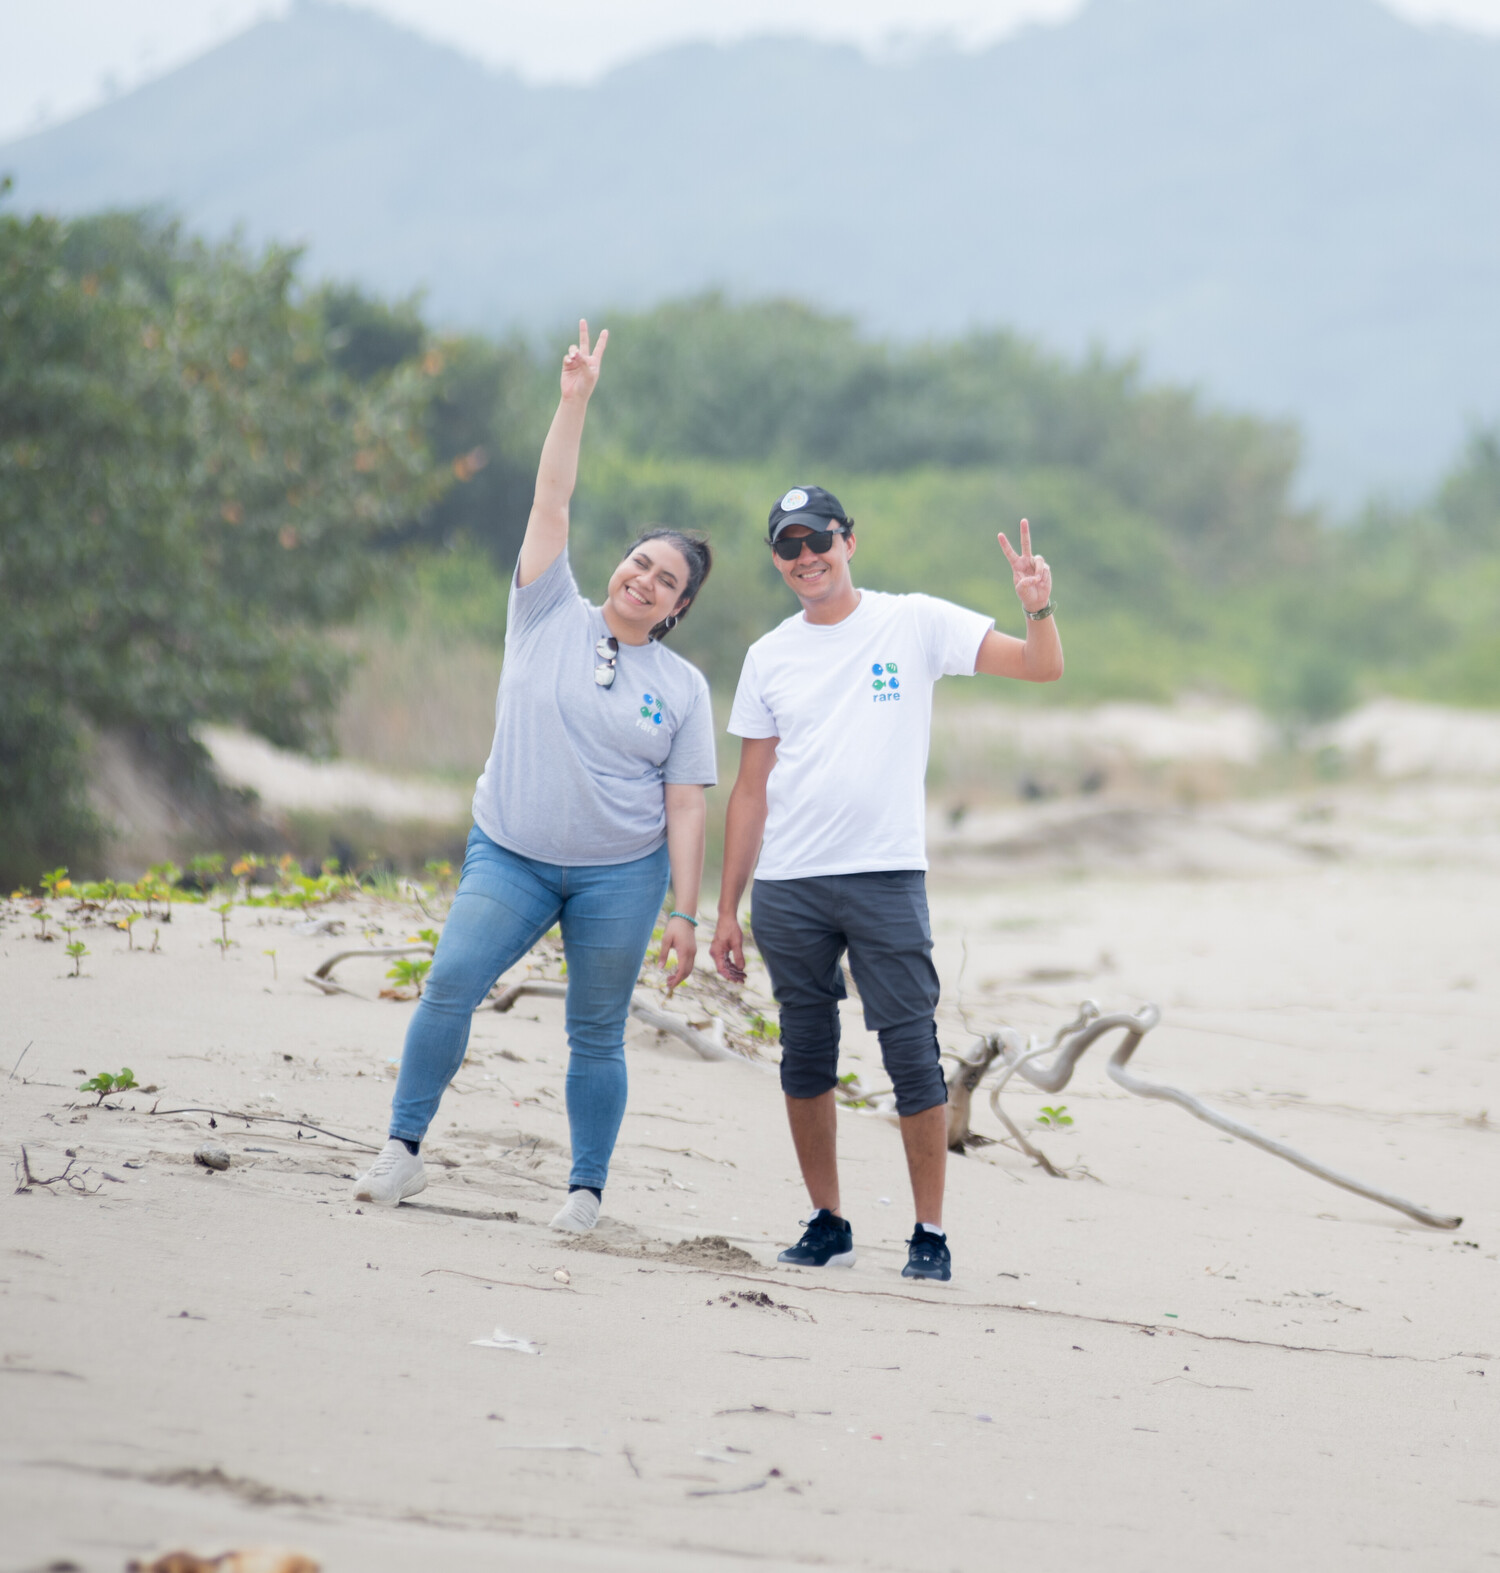 Vicky and Emilio from Rare Fish Forever team on the beach in Honduras.